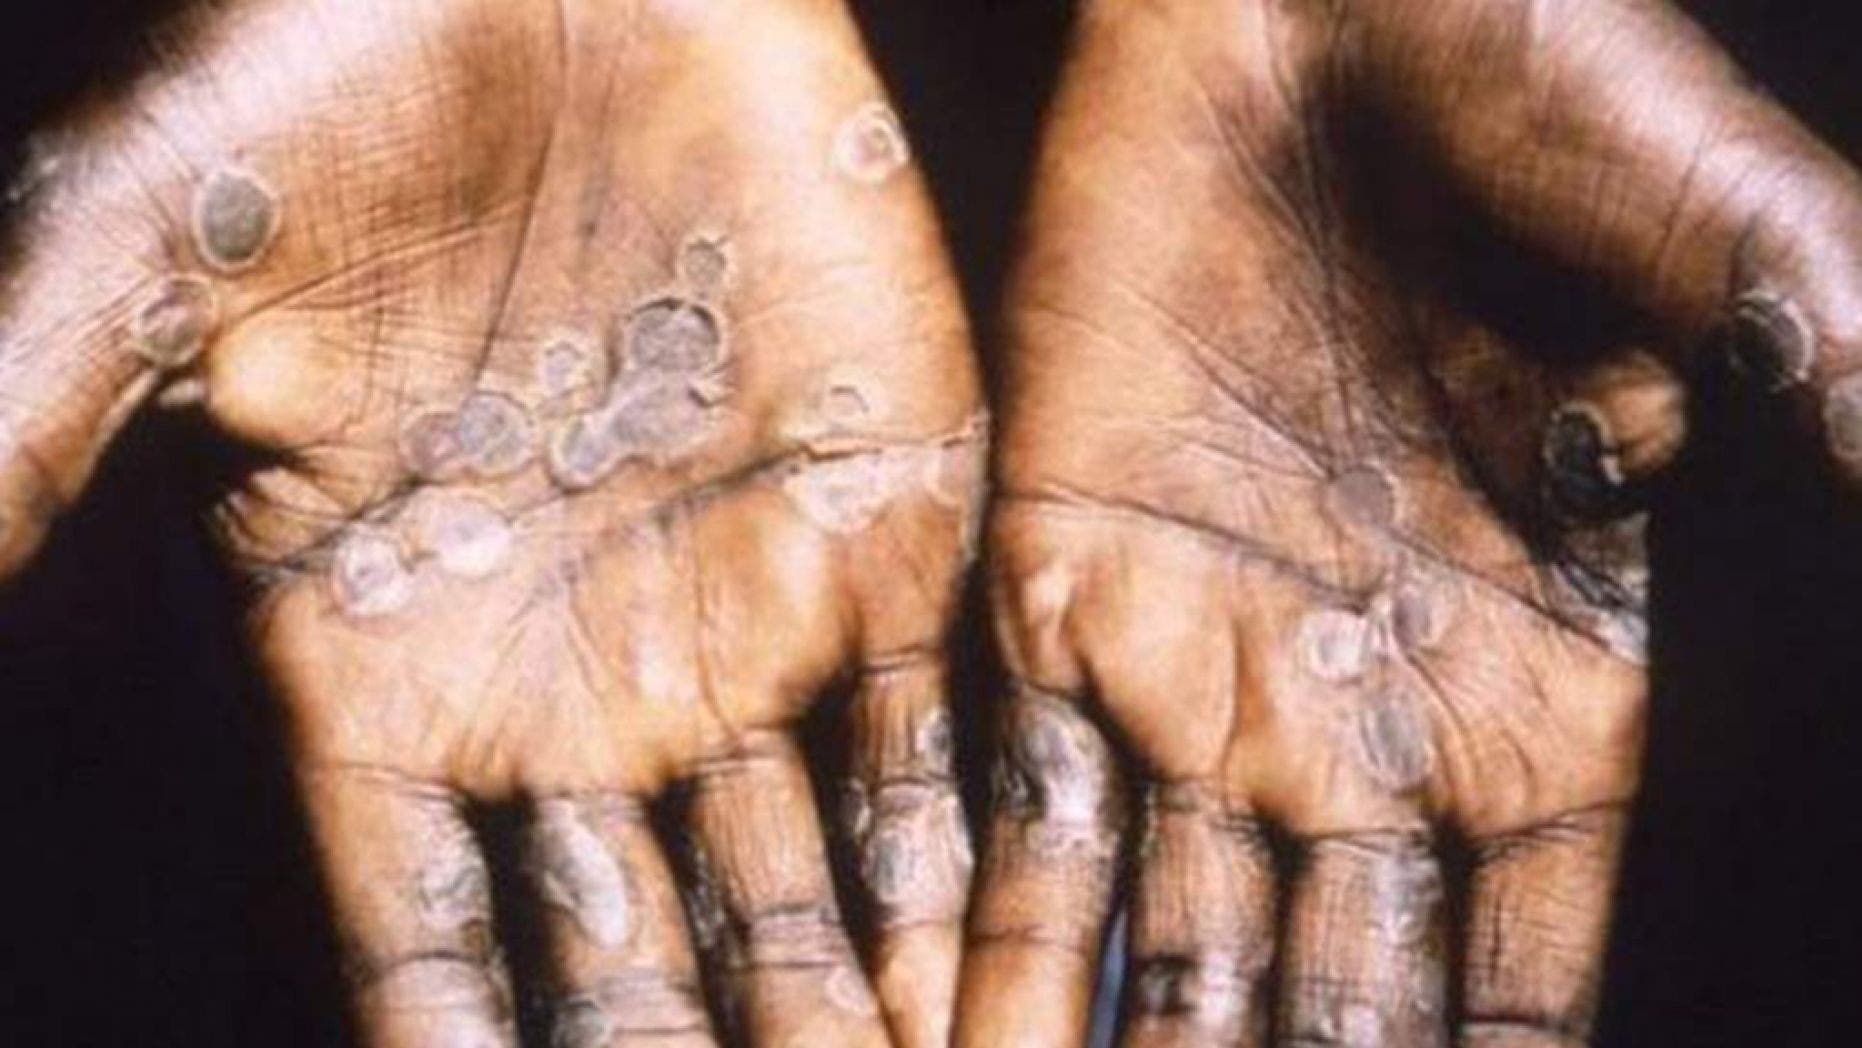 Monkeypox in US: CDC monitoring 200 people in 27 states, other countries - Fox News